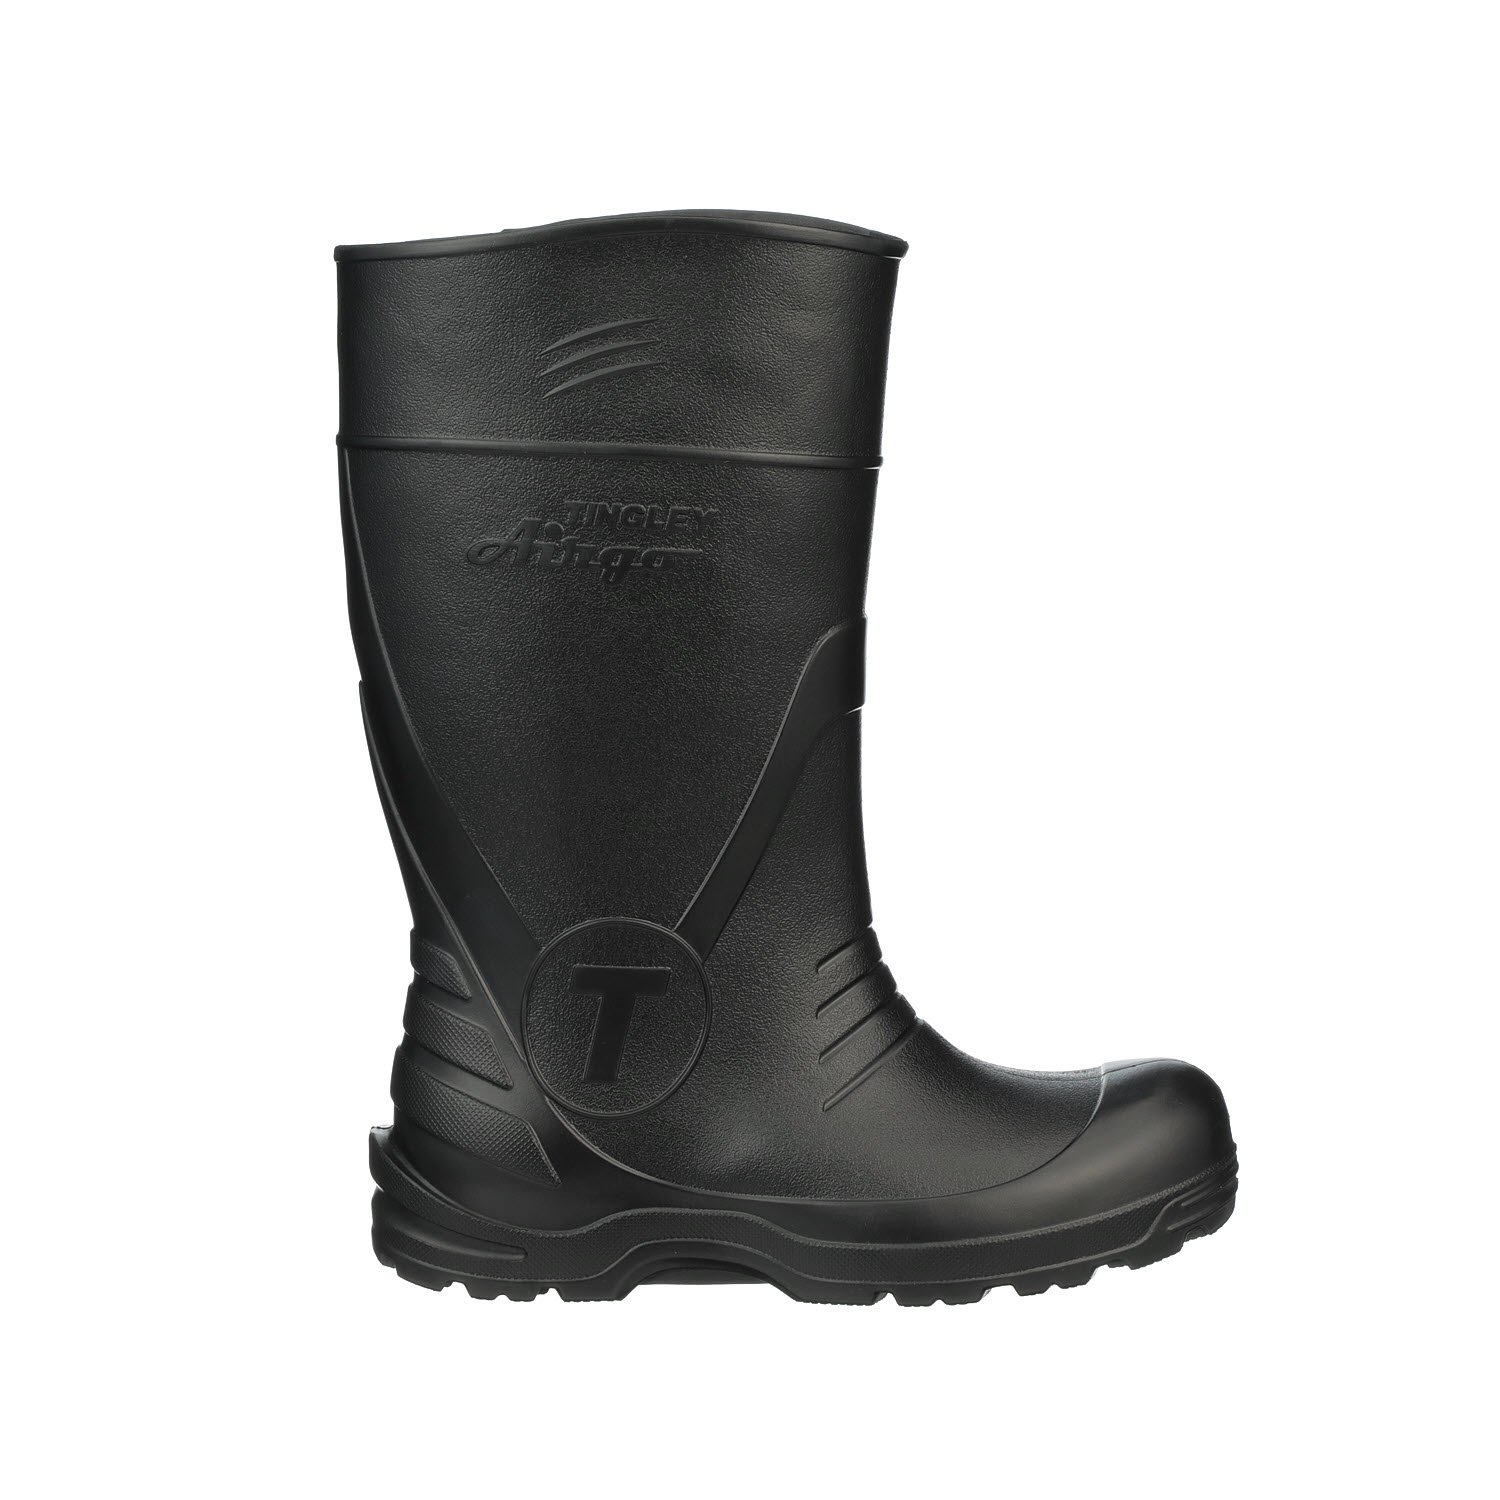 Tingly Airgo Ultra Lightweight Boot from Columbia Safety